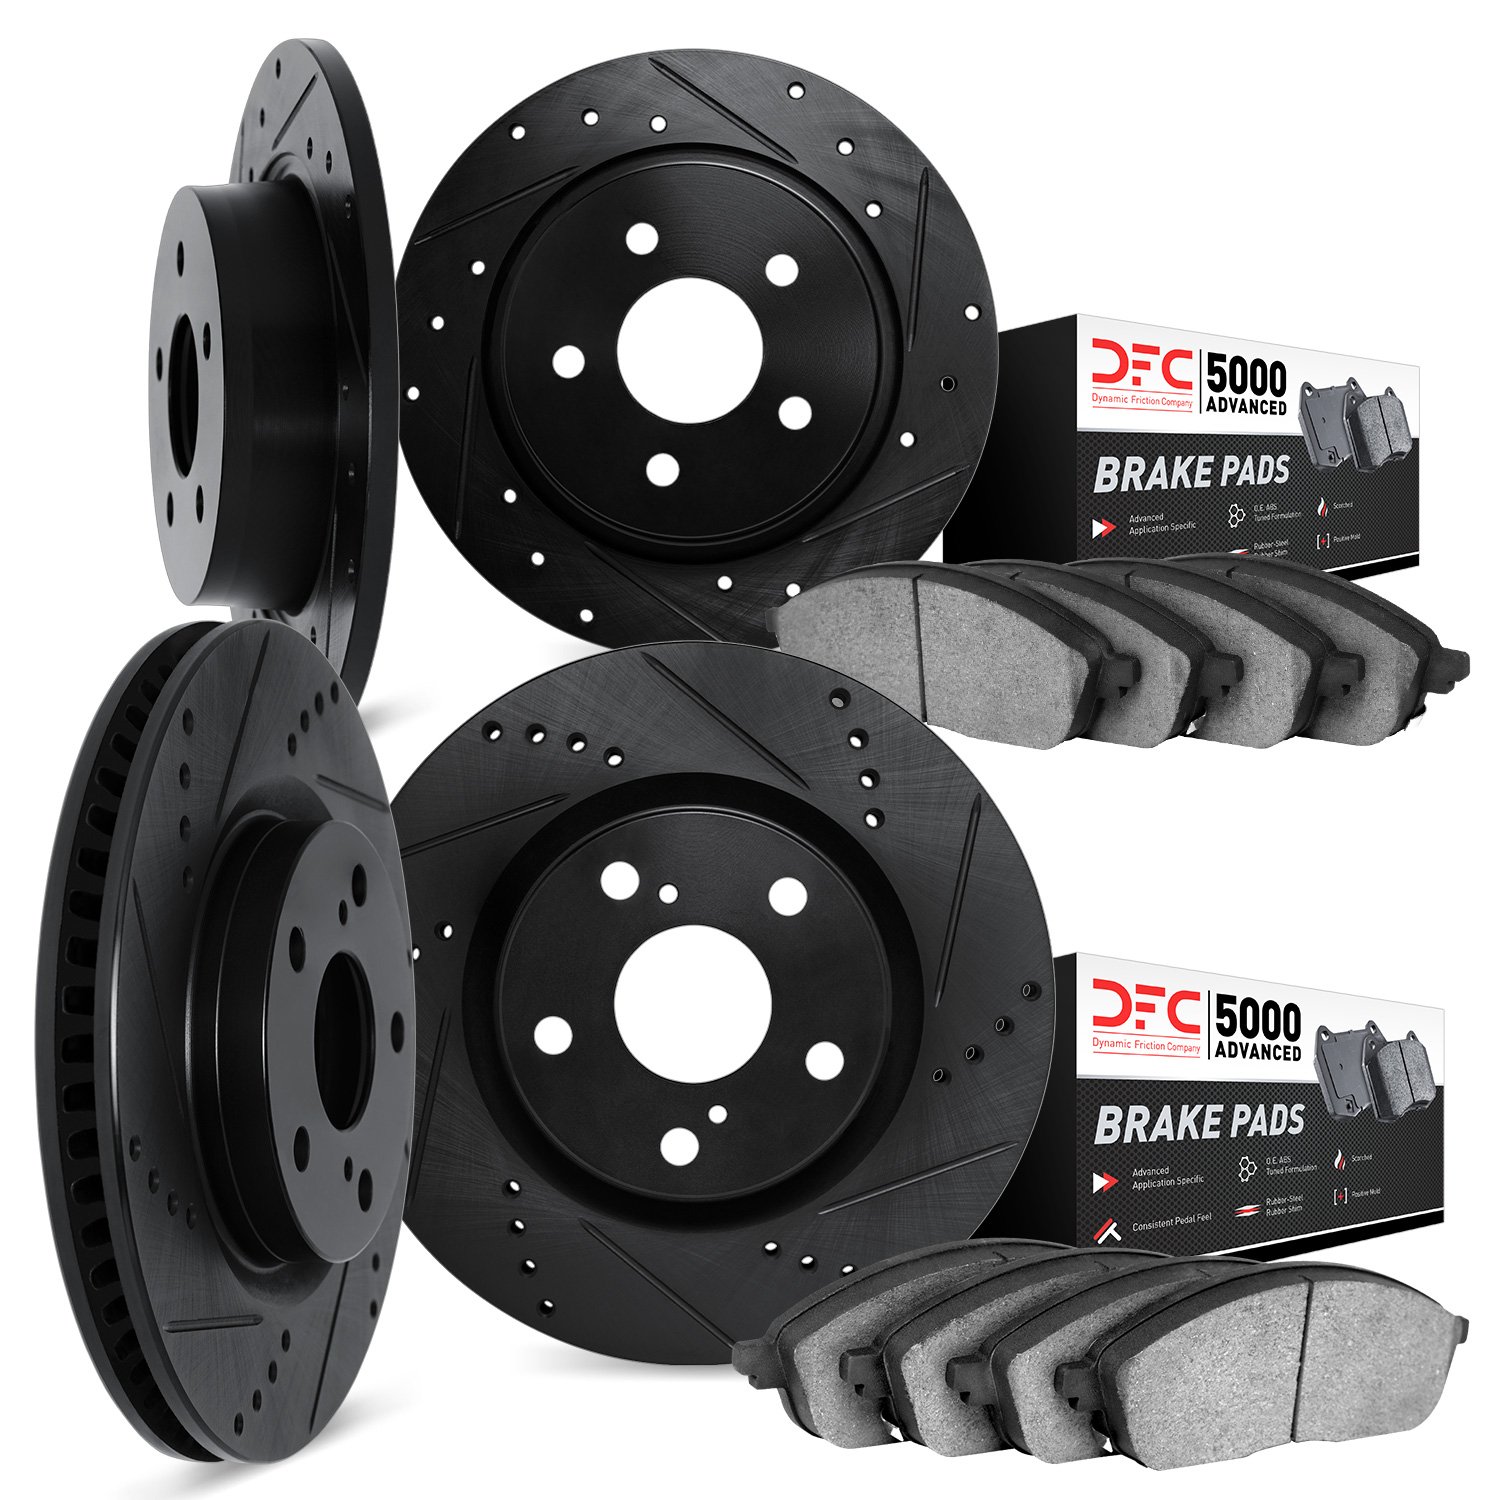 8504-67089 Drilled/Slotted Brake Rotors w/5000 Advanced Brake Pads Kit [Black], 1994-1999 Infiniti/Nissan, Position: Front and R